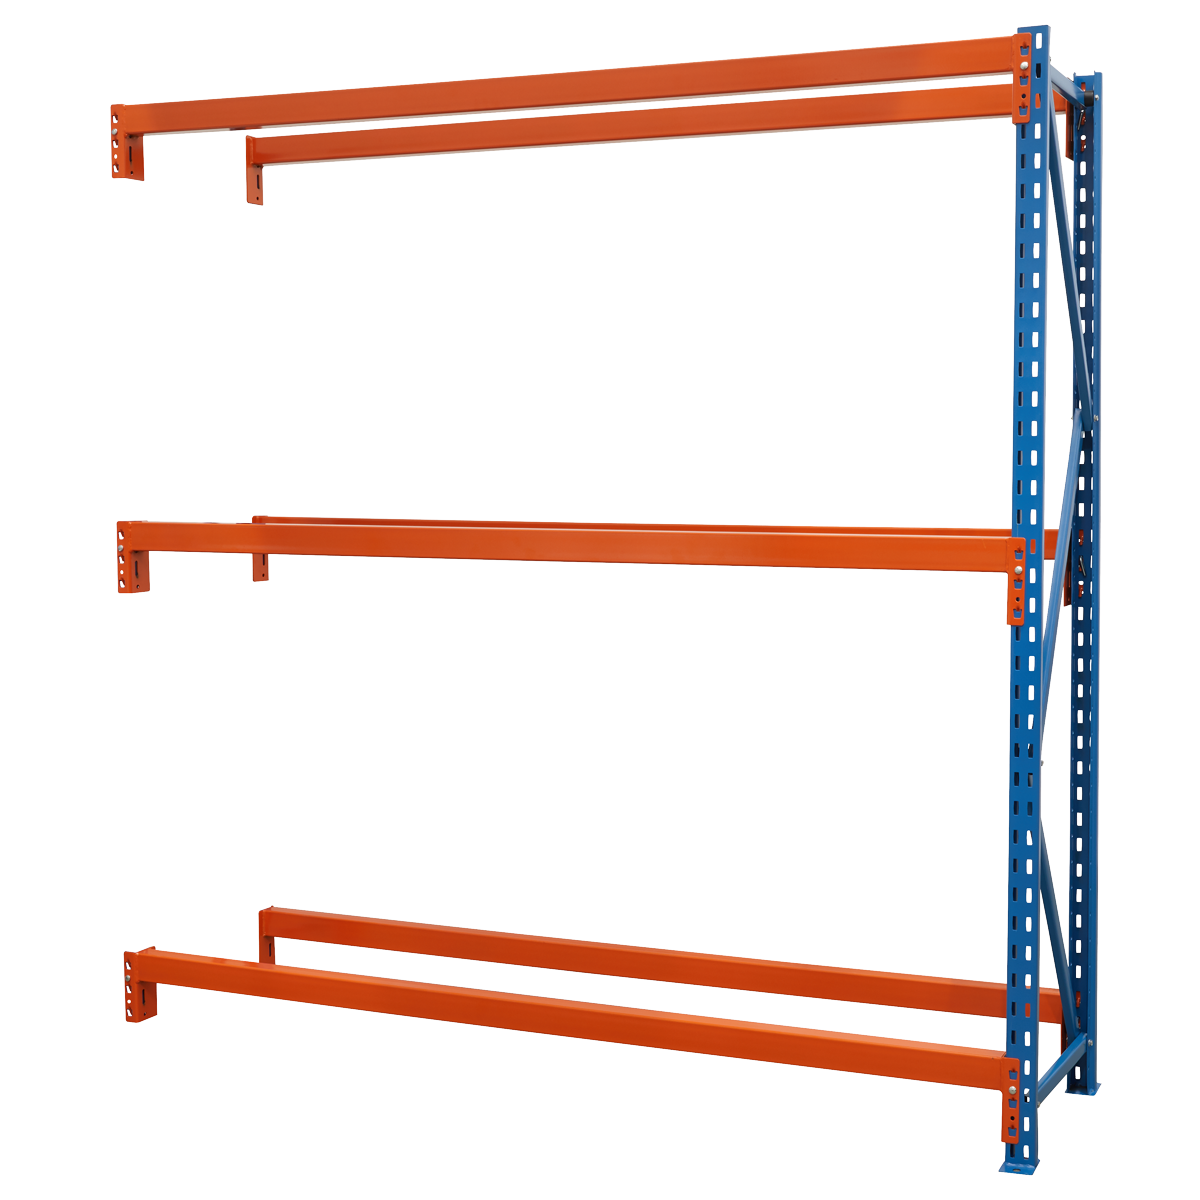 Tyre Rack Extension Two Level 200kg Capacity Per Level